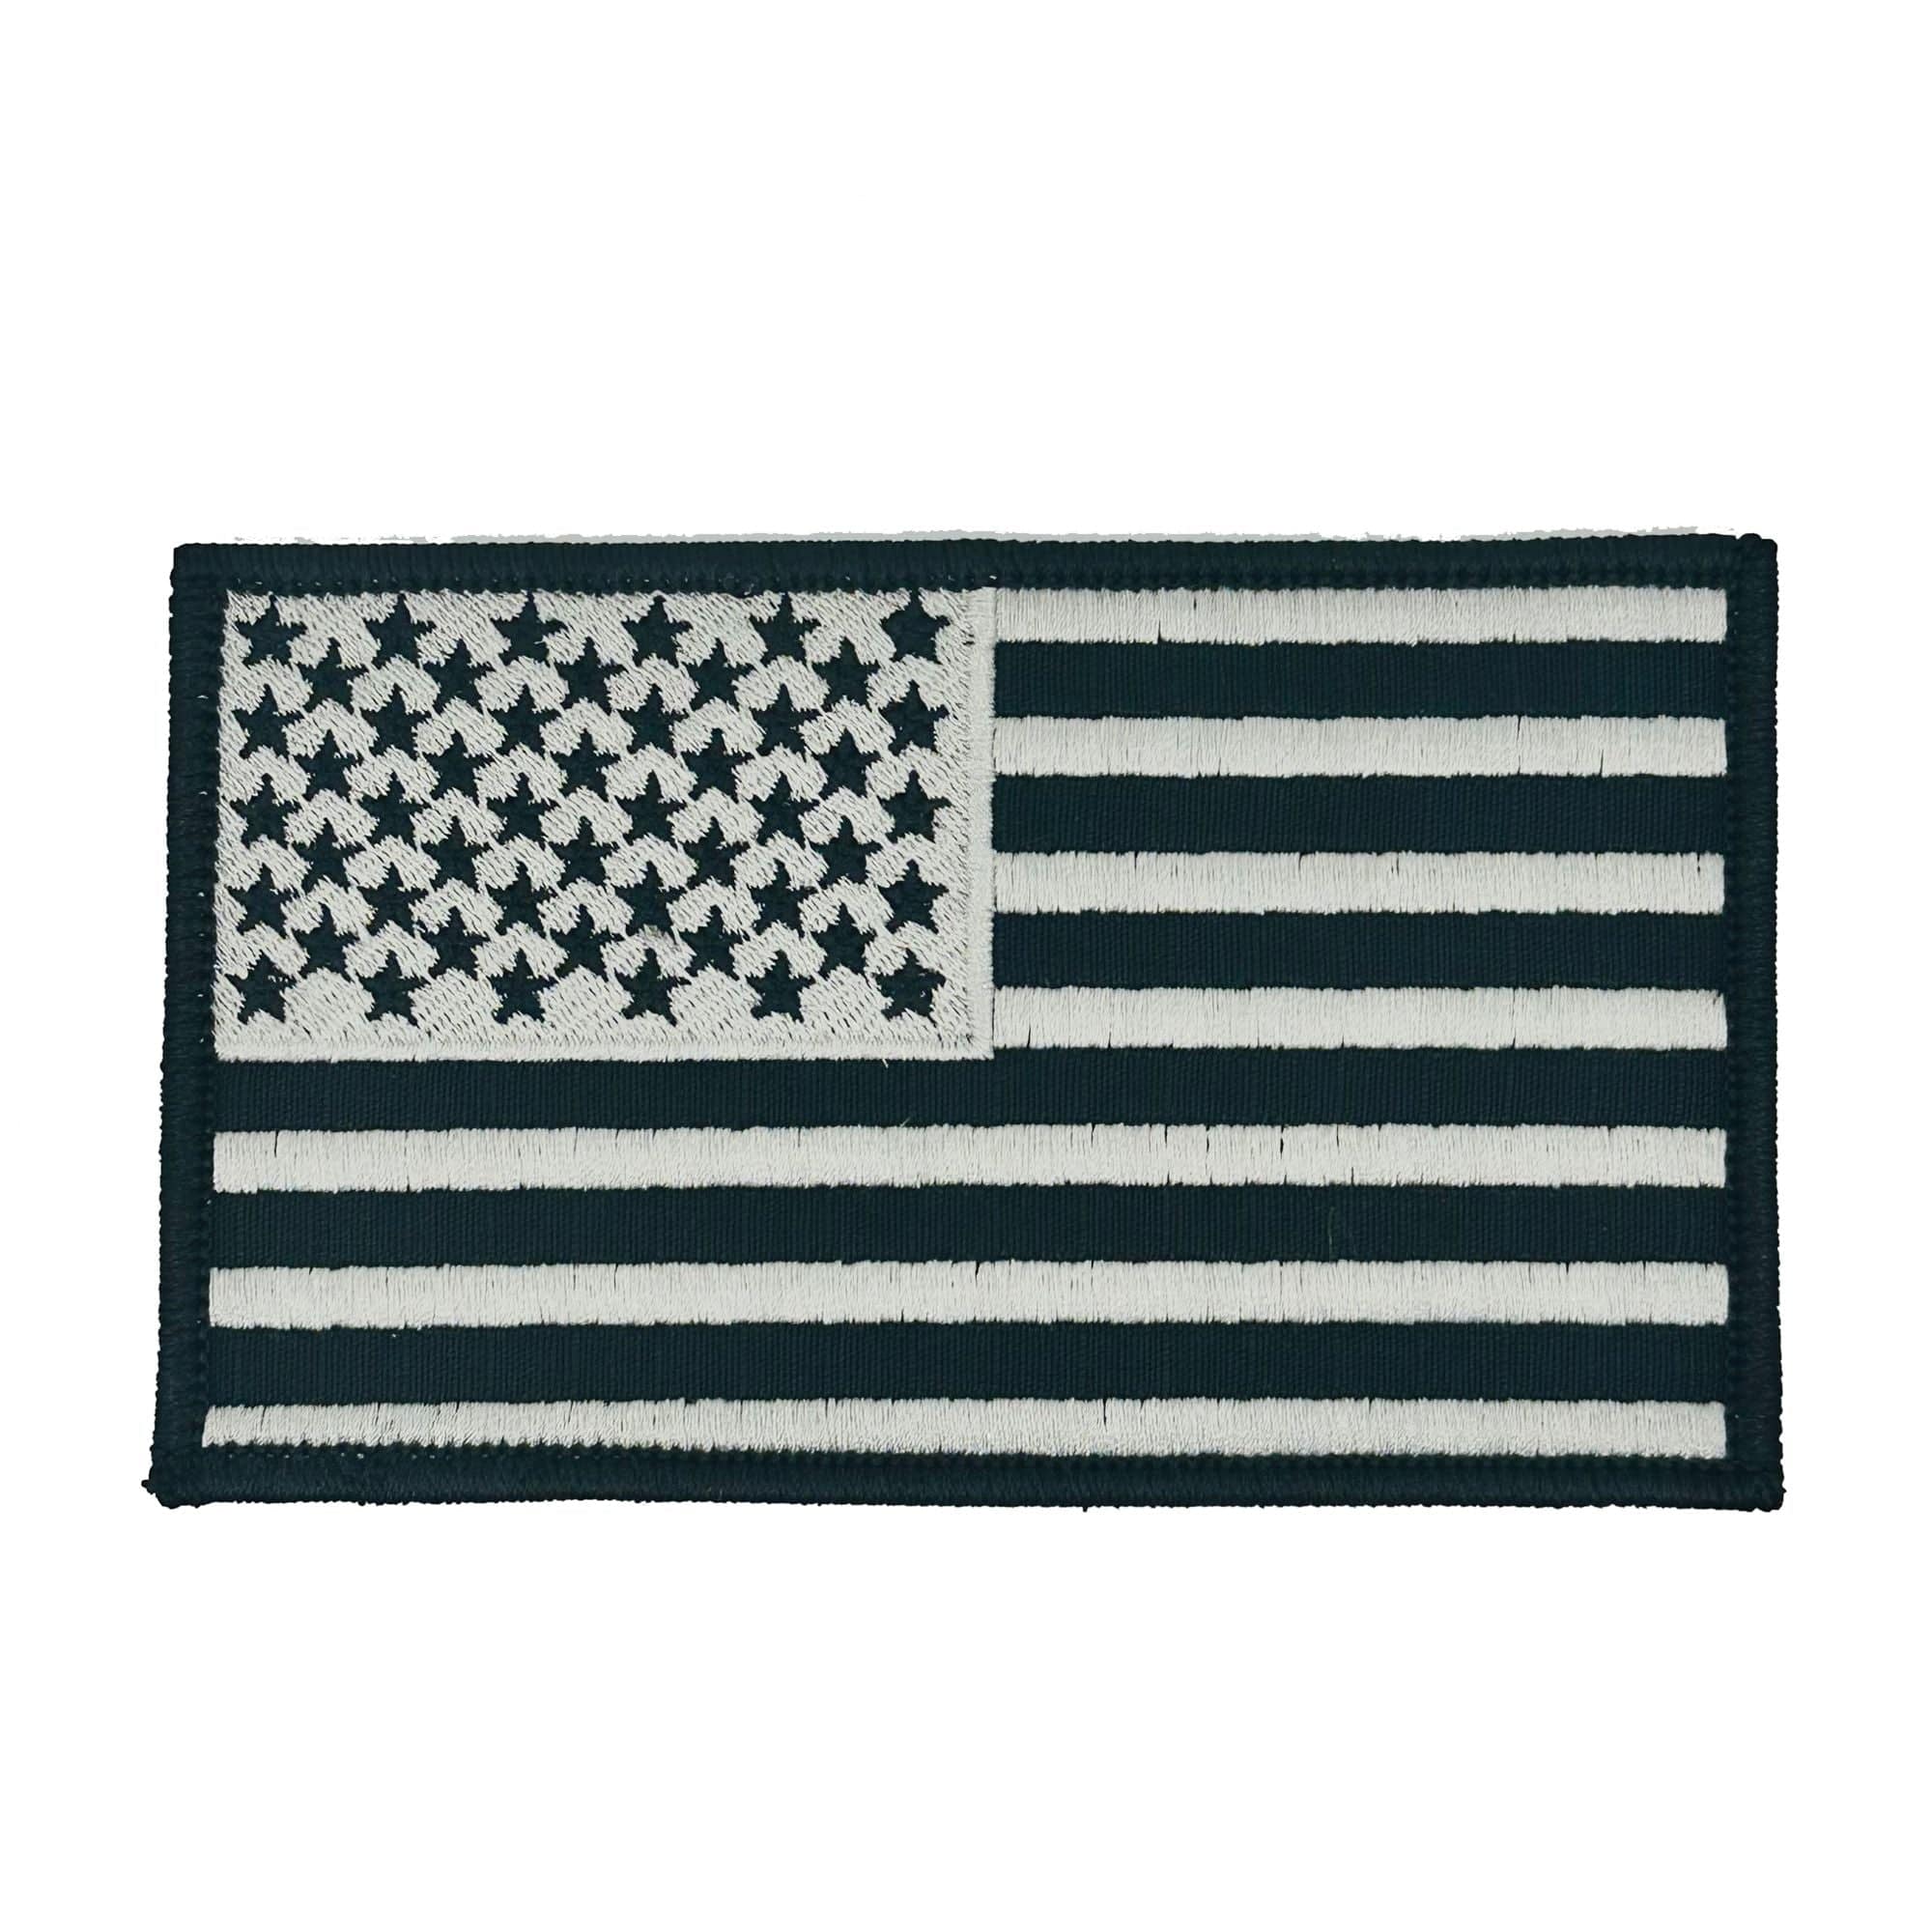 Black And White USA United States Flag Patch, Patriotic Patches